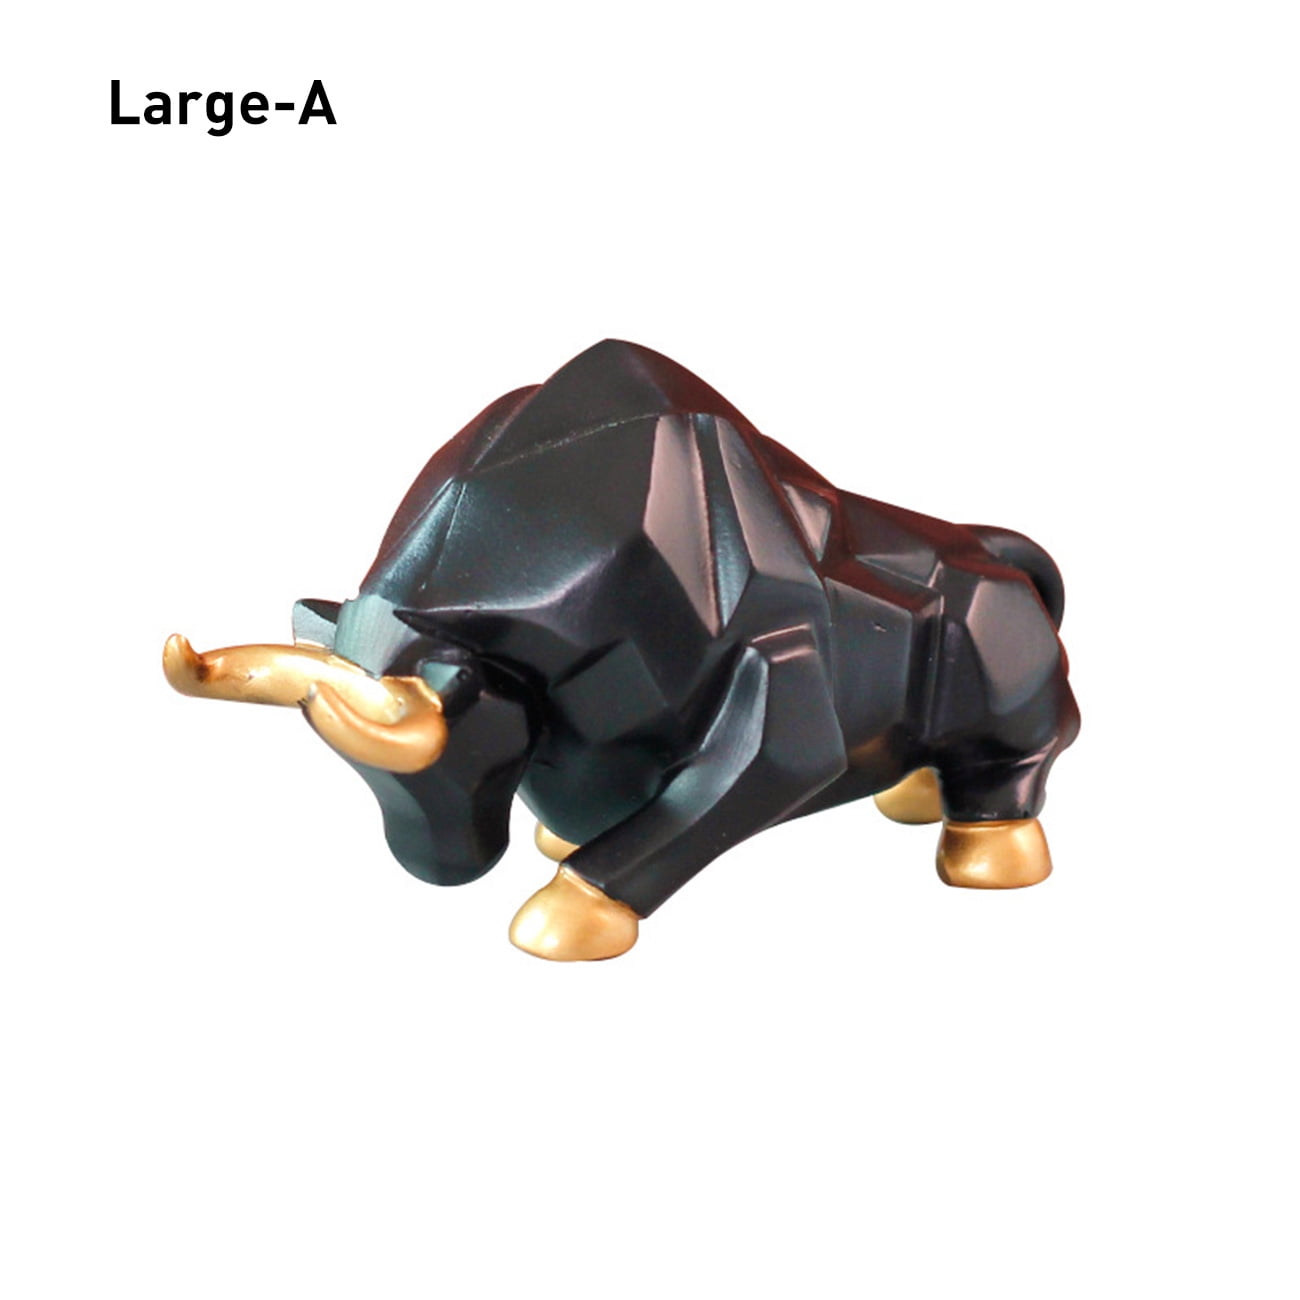 Resin Bull Statue Bison Sculpture Home Decoration Abstract Figurine Modern Decor 